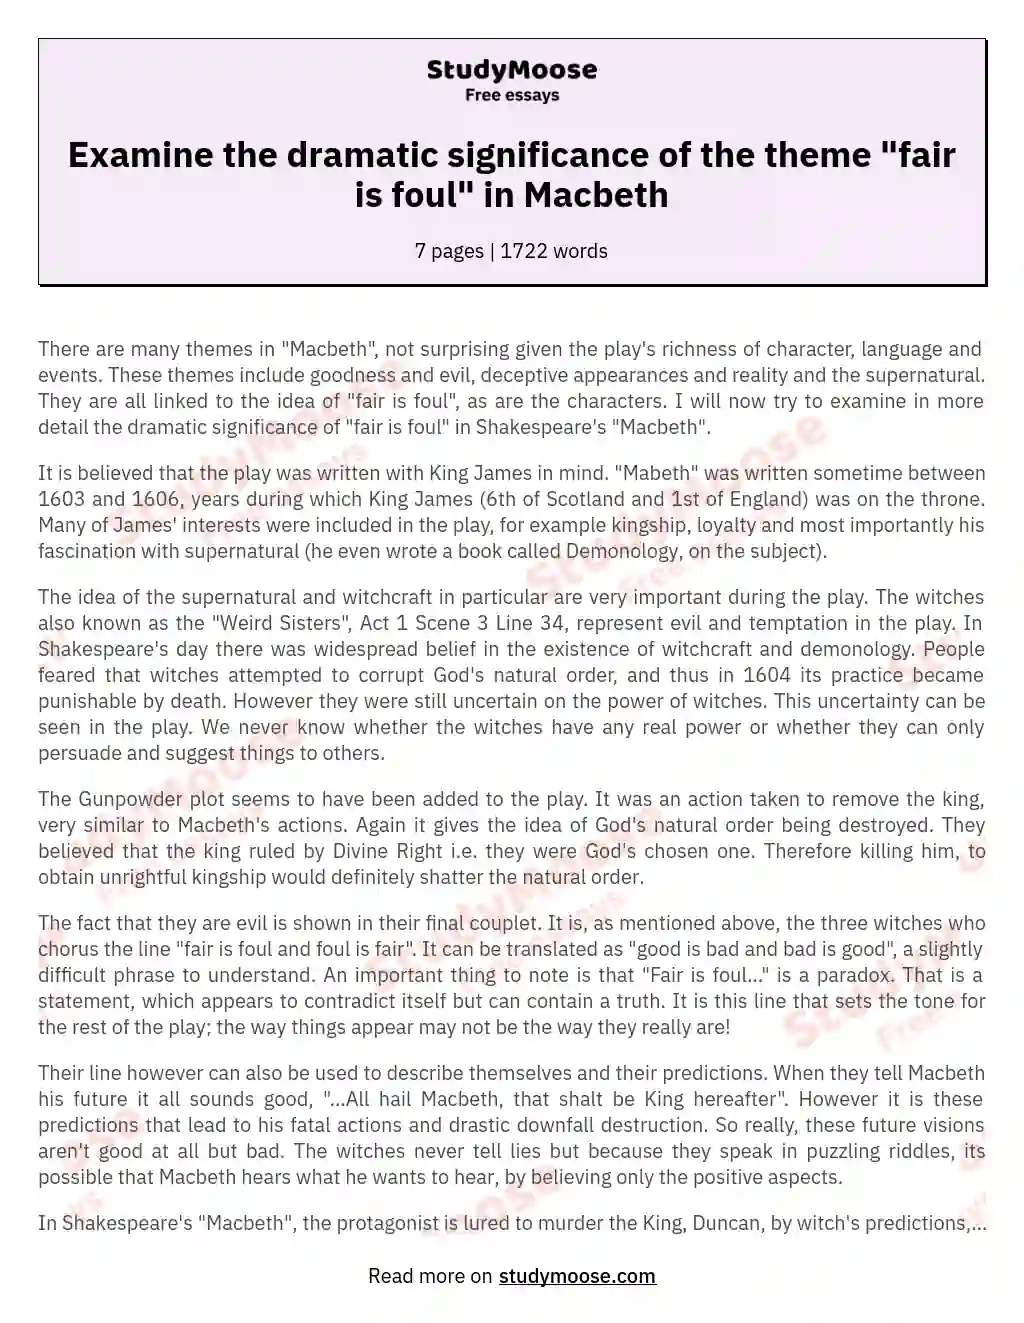 Examine the dramatic significance of the theme "fair is foul" in Macbeth